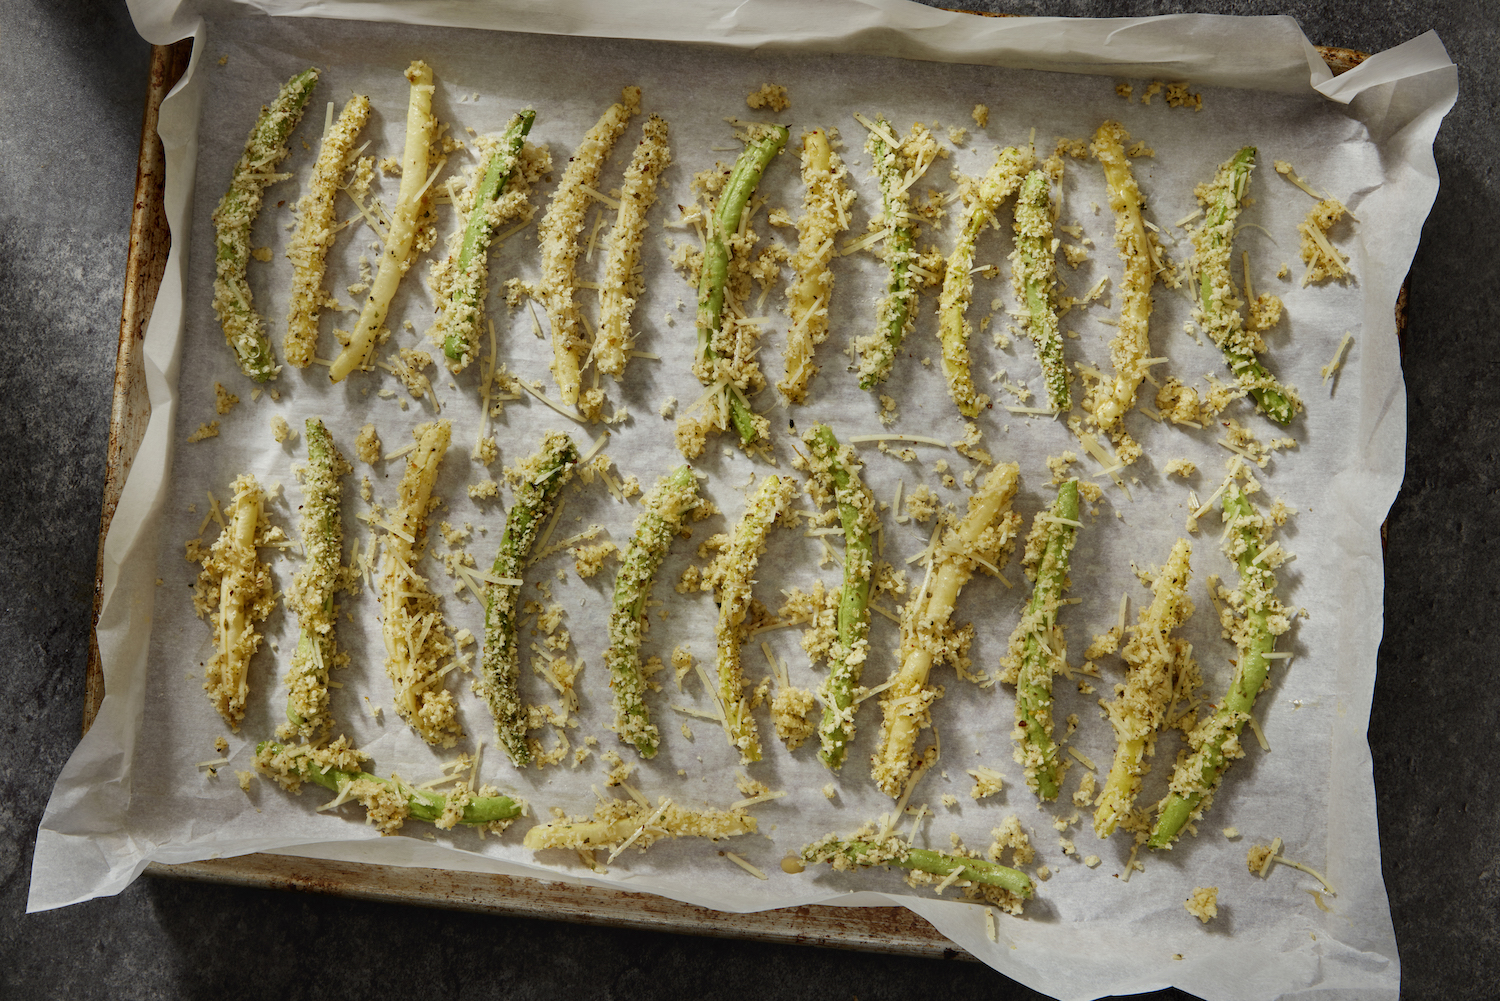 Crispy Parmesan, Panko, Garlic Crusted Yellow and Green Been Fries on a parchment-lined baking sheet